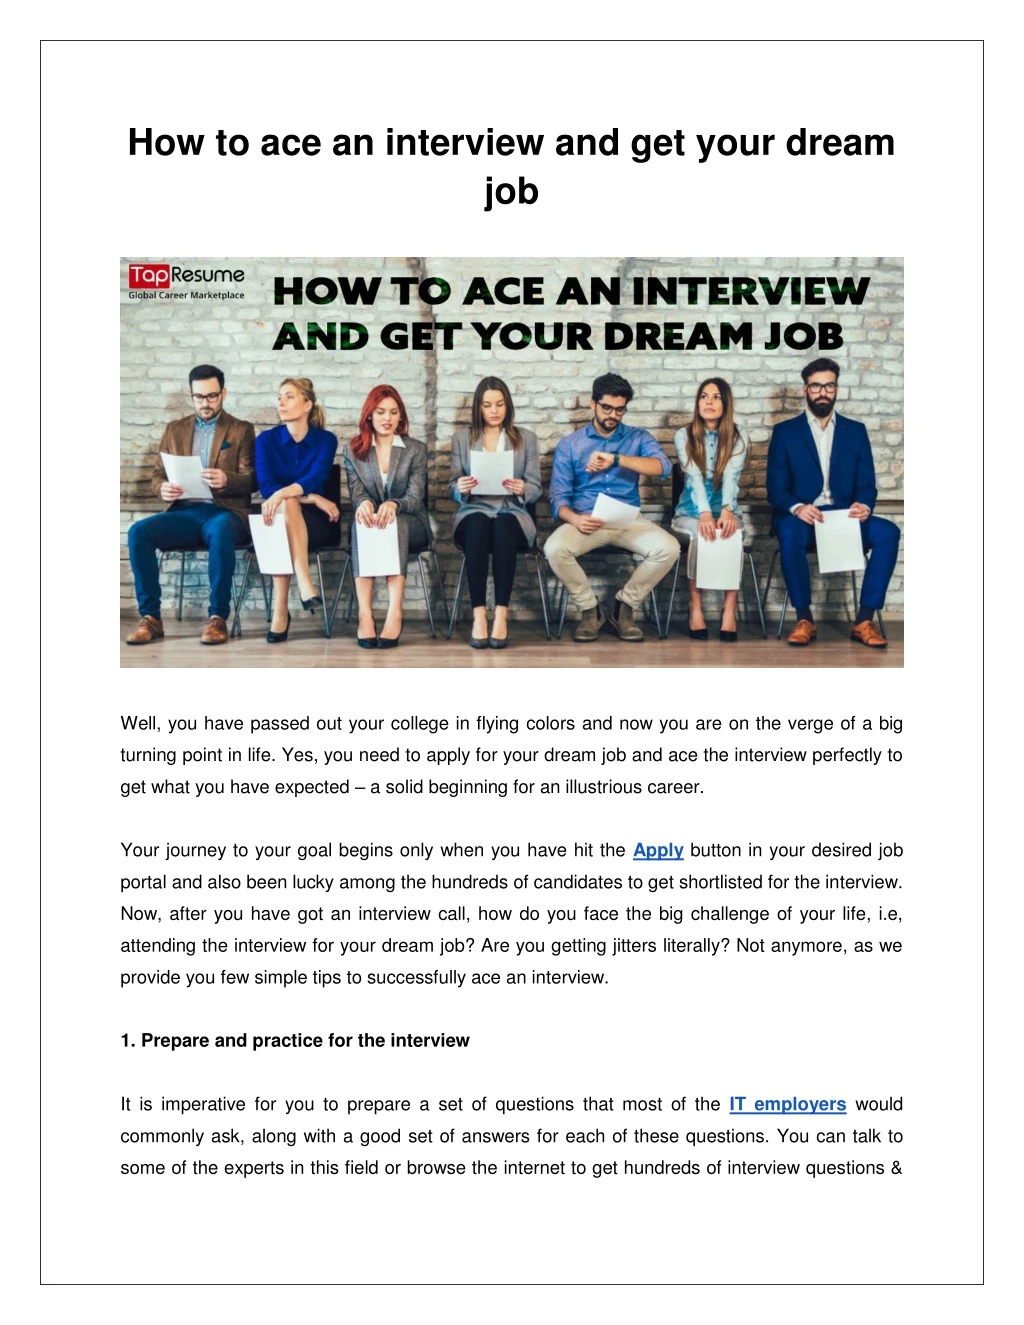 how to ace an interview and get your dream job